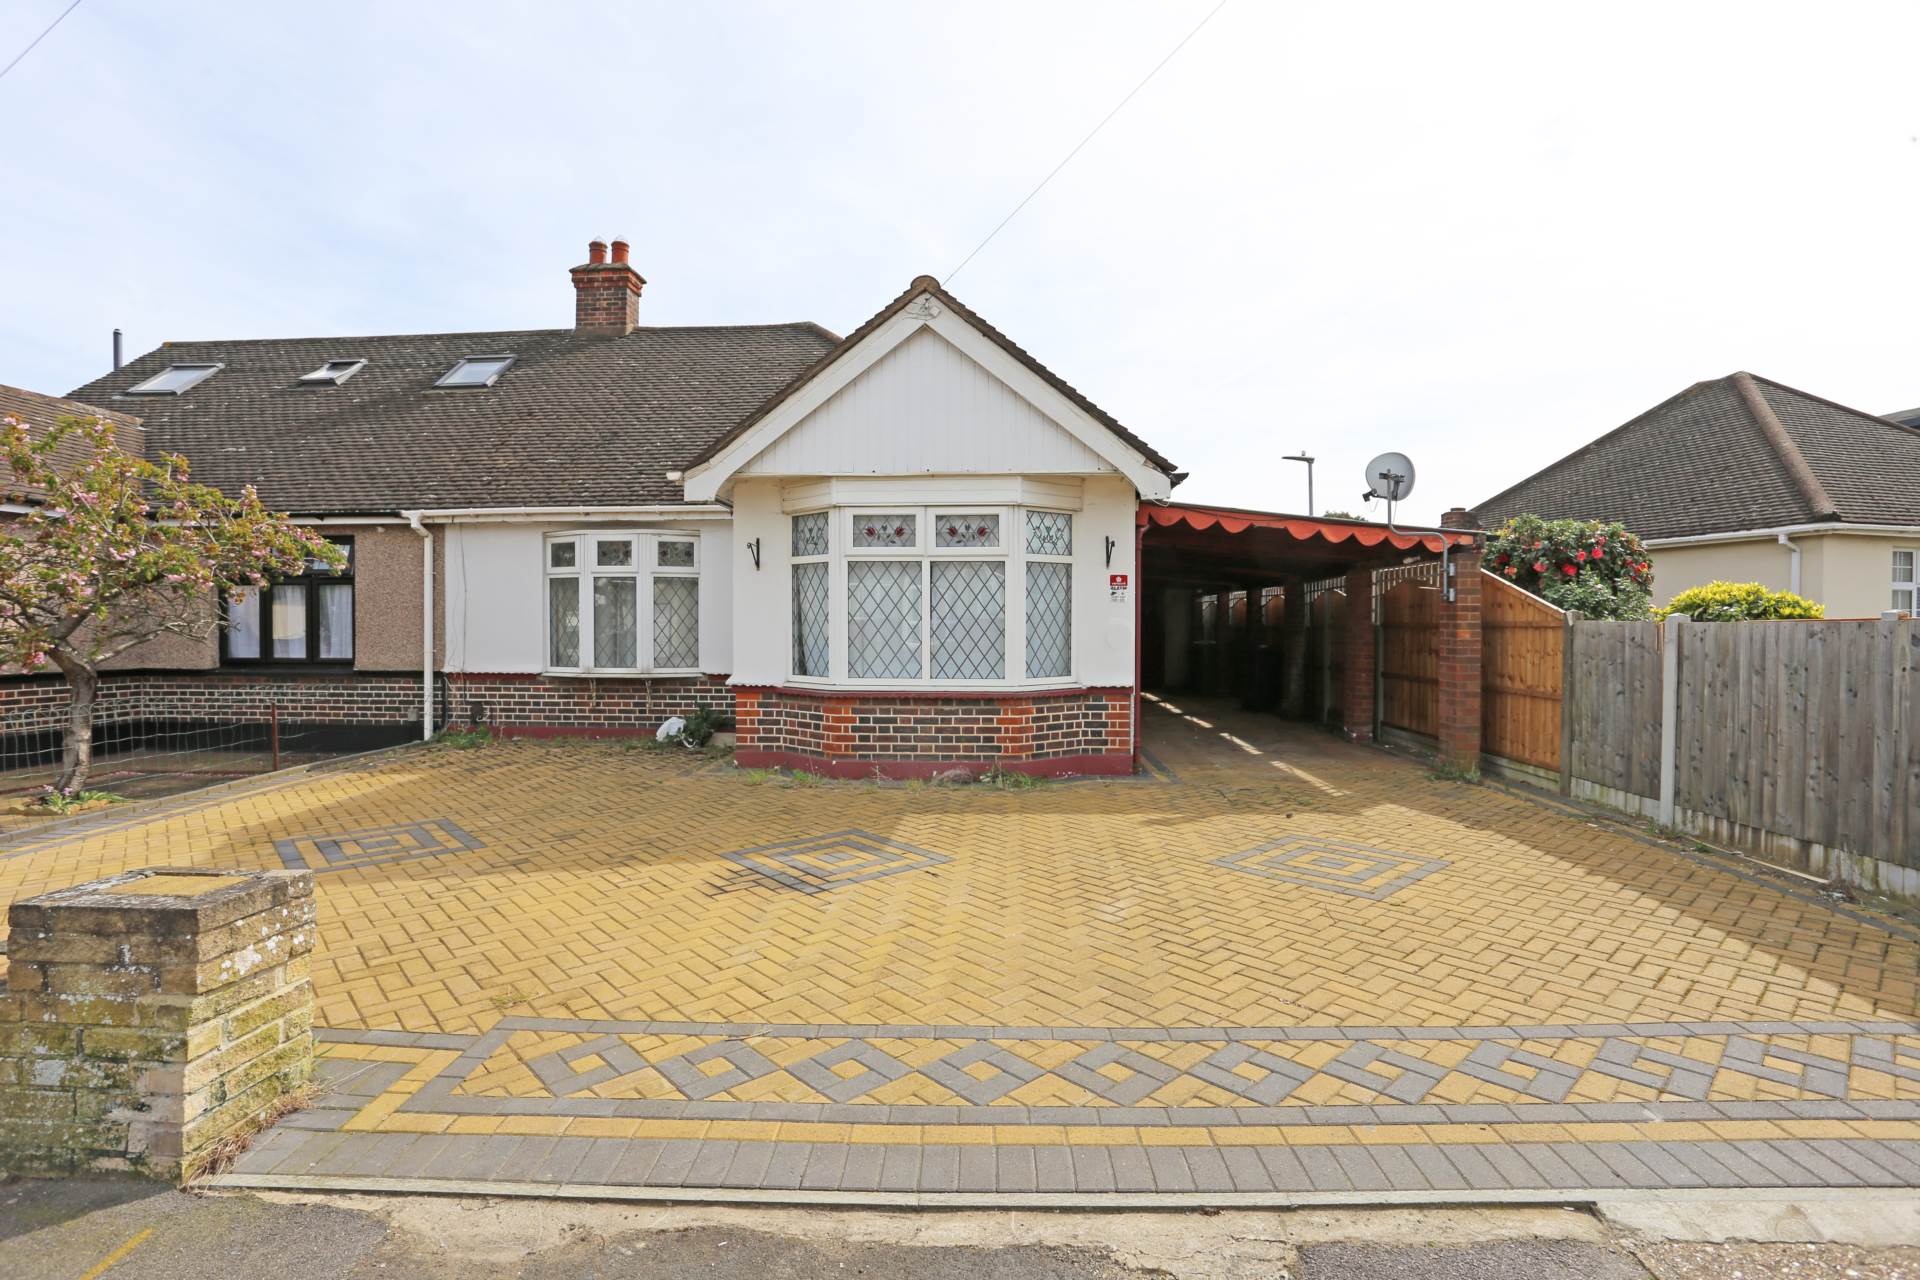 2 bed Bungalow for rent in Romford. From Real Move Estates